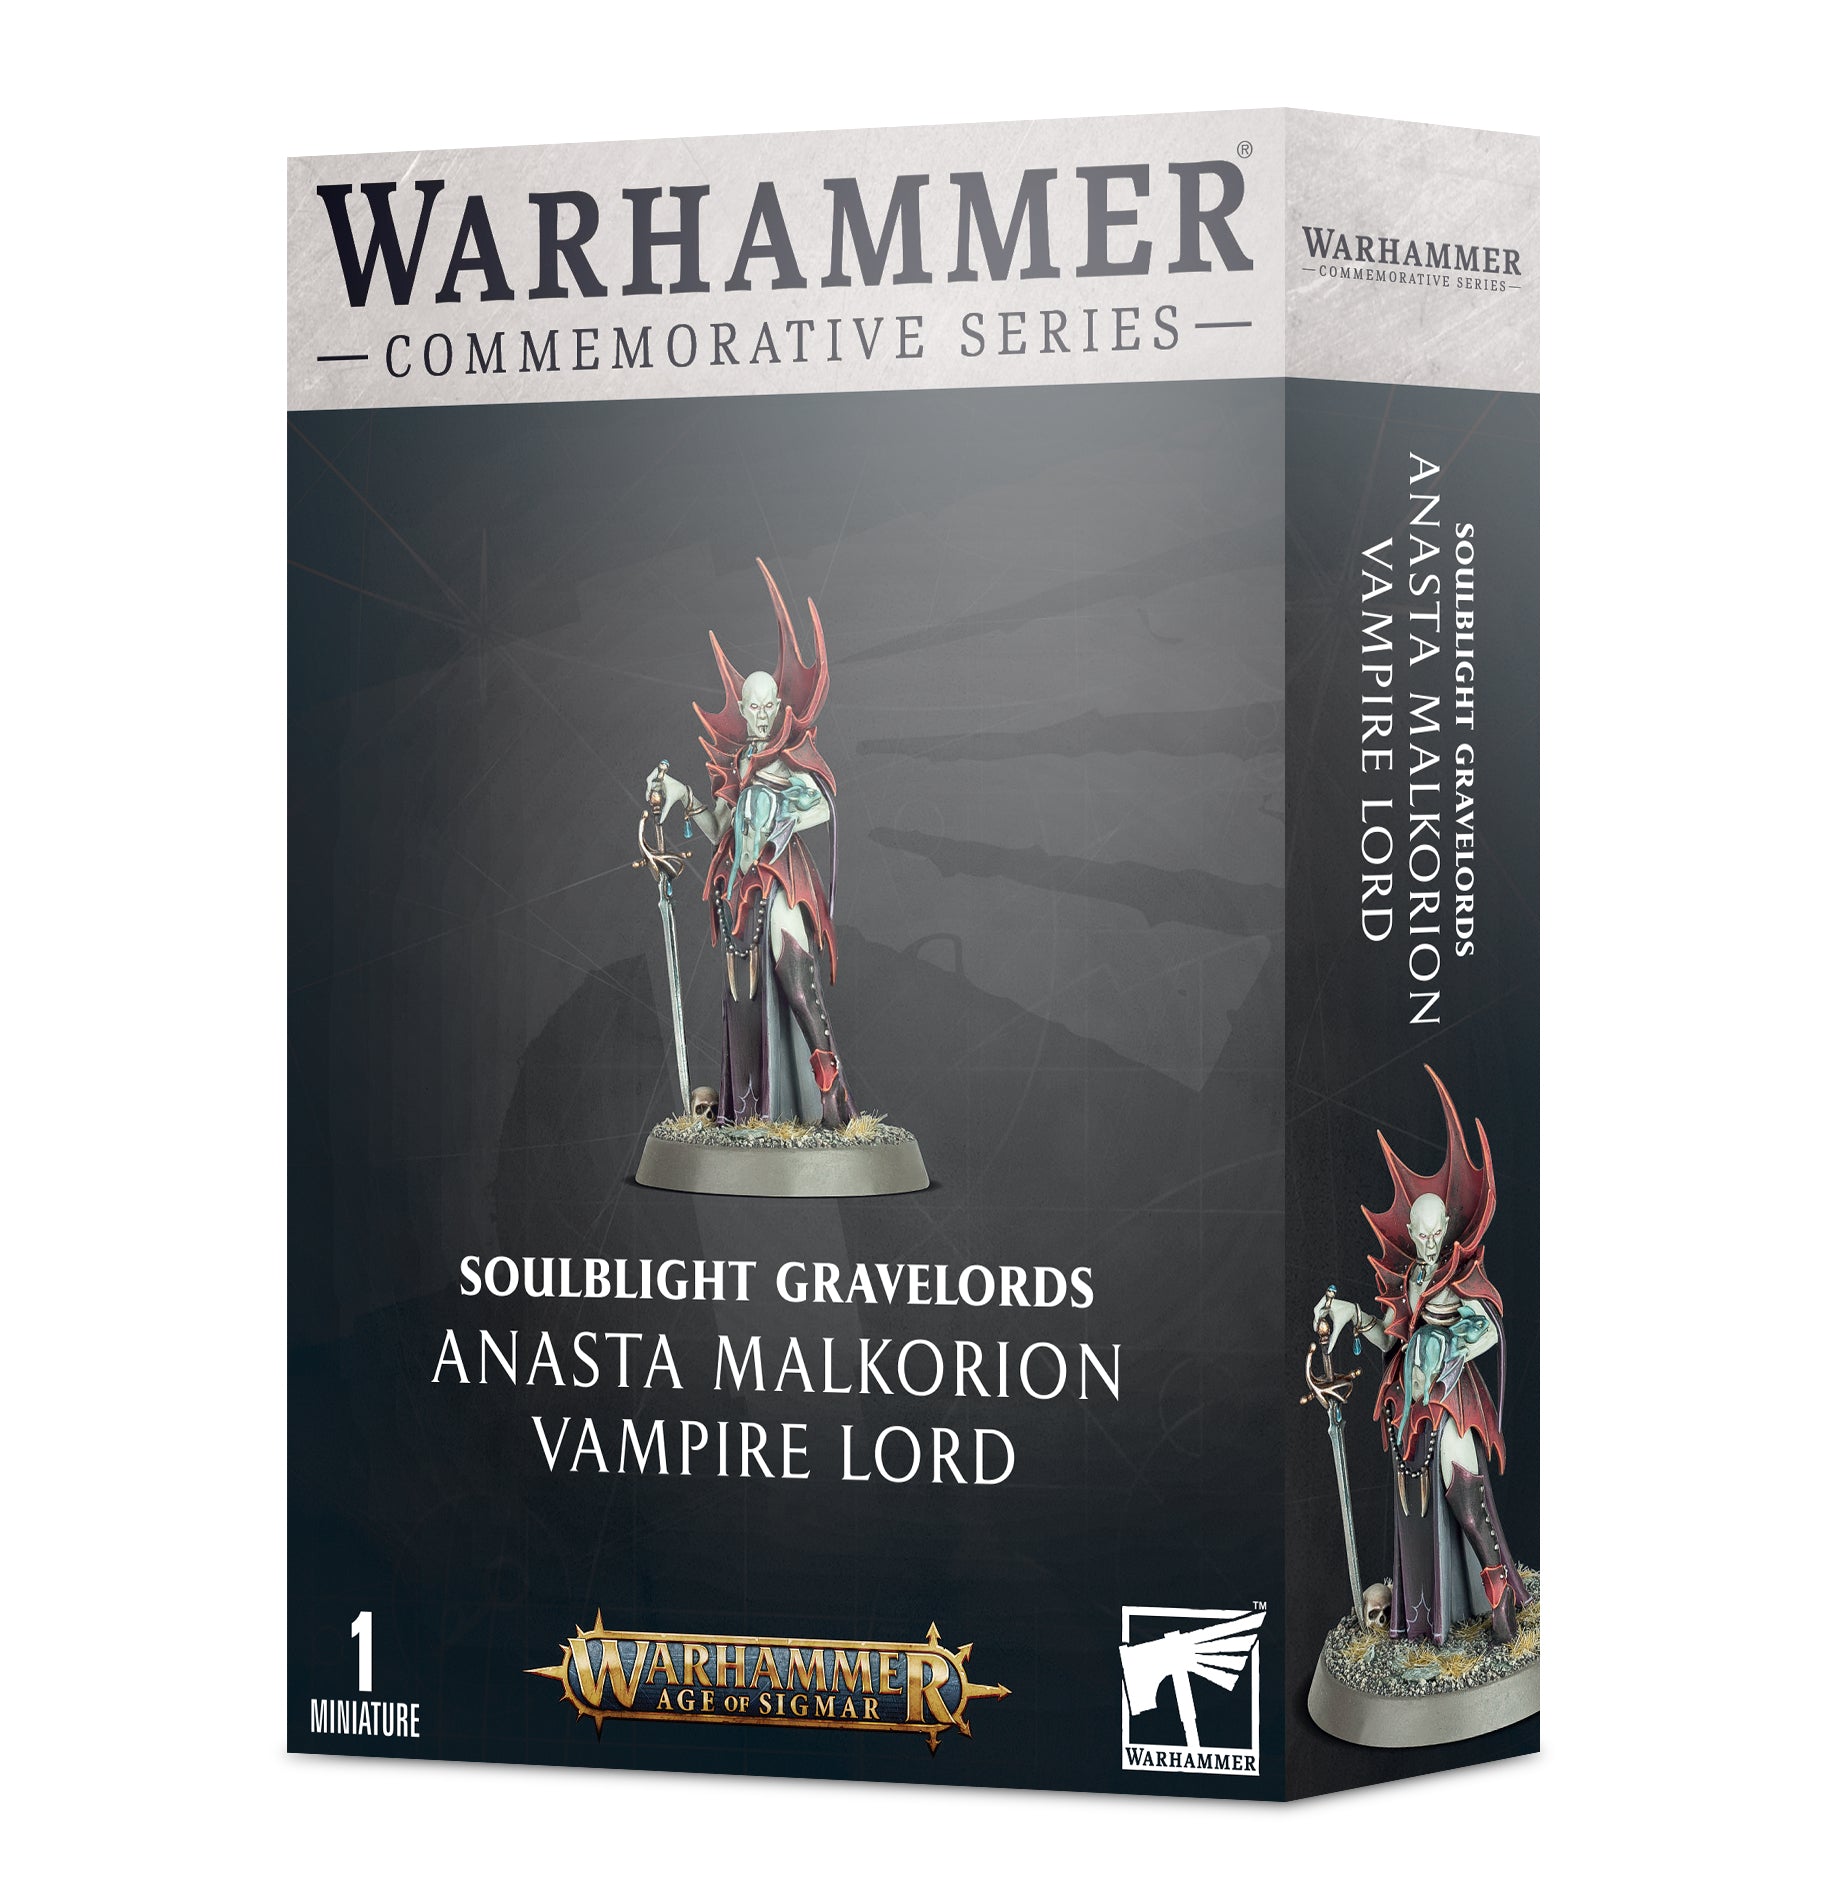 Warhammer Day ANASTA MALKORIAN VAMPIRE LORD Gravelords Games Workshop    | Red Claw Gaming